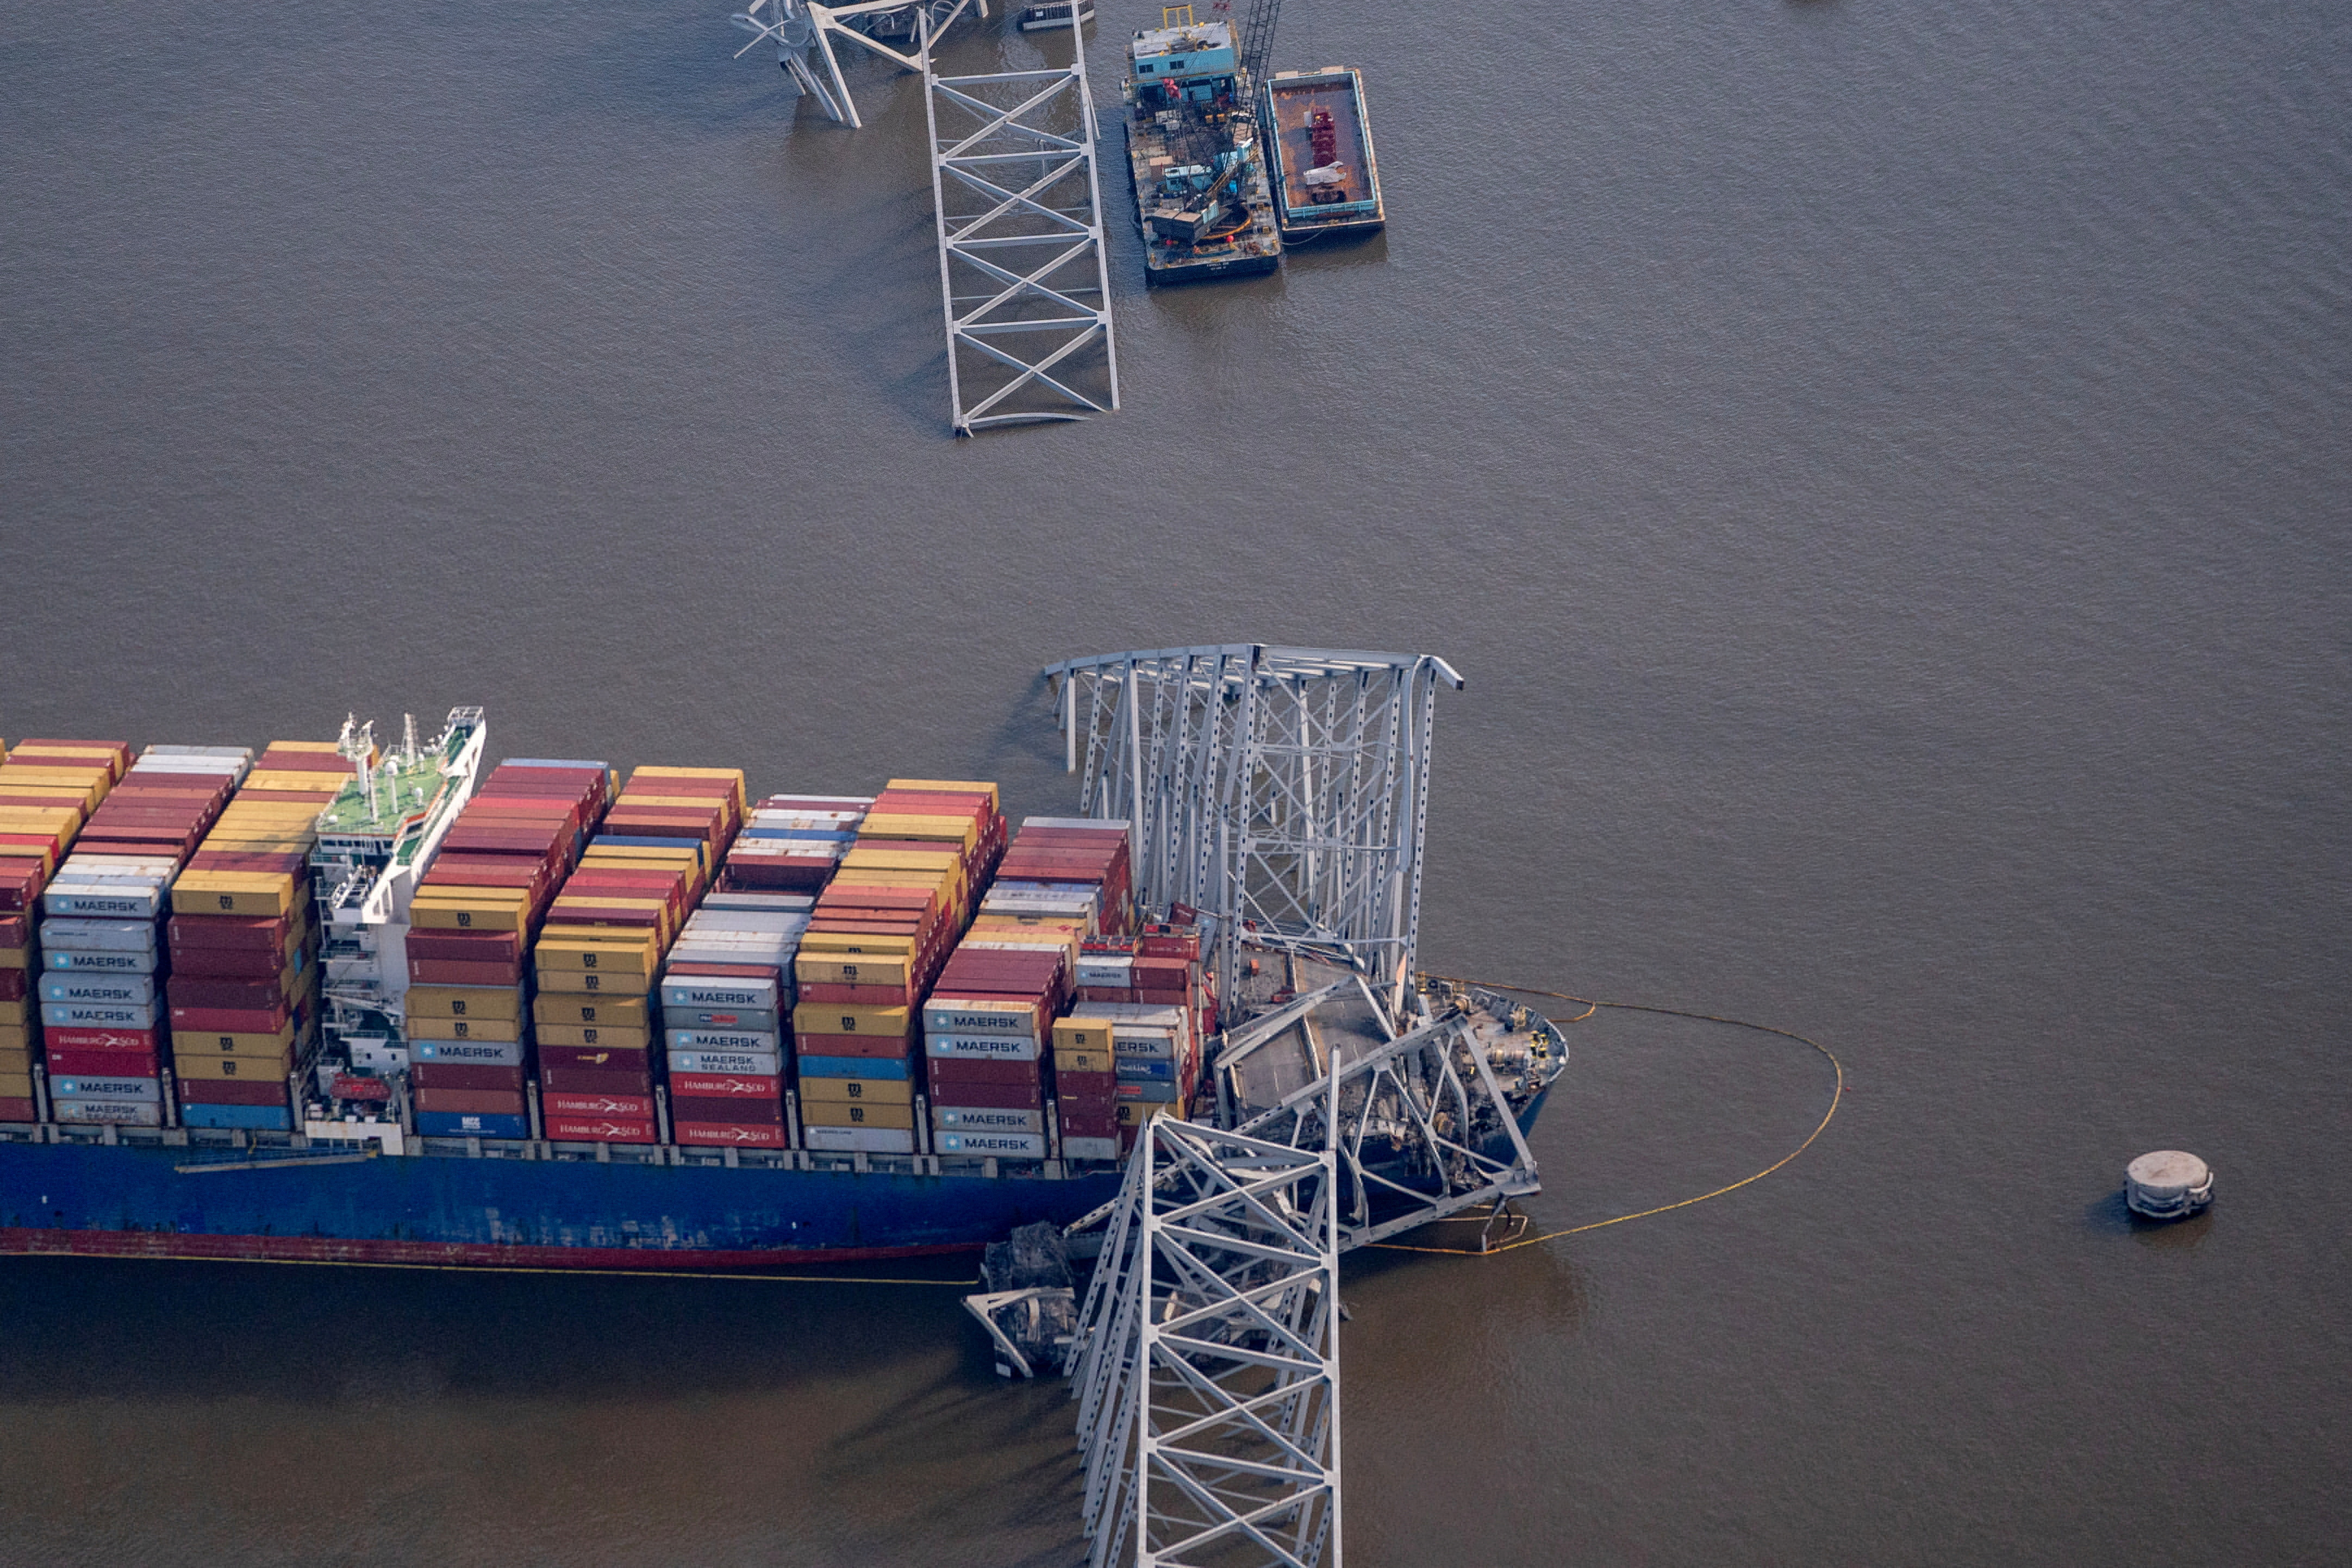 View of the Dali cargo vessel which crashed into the Francis Scott Key Bridge causing it to collapse in Baltimore, Maryland